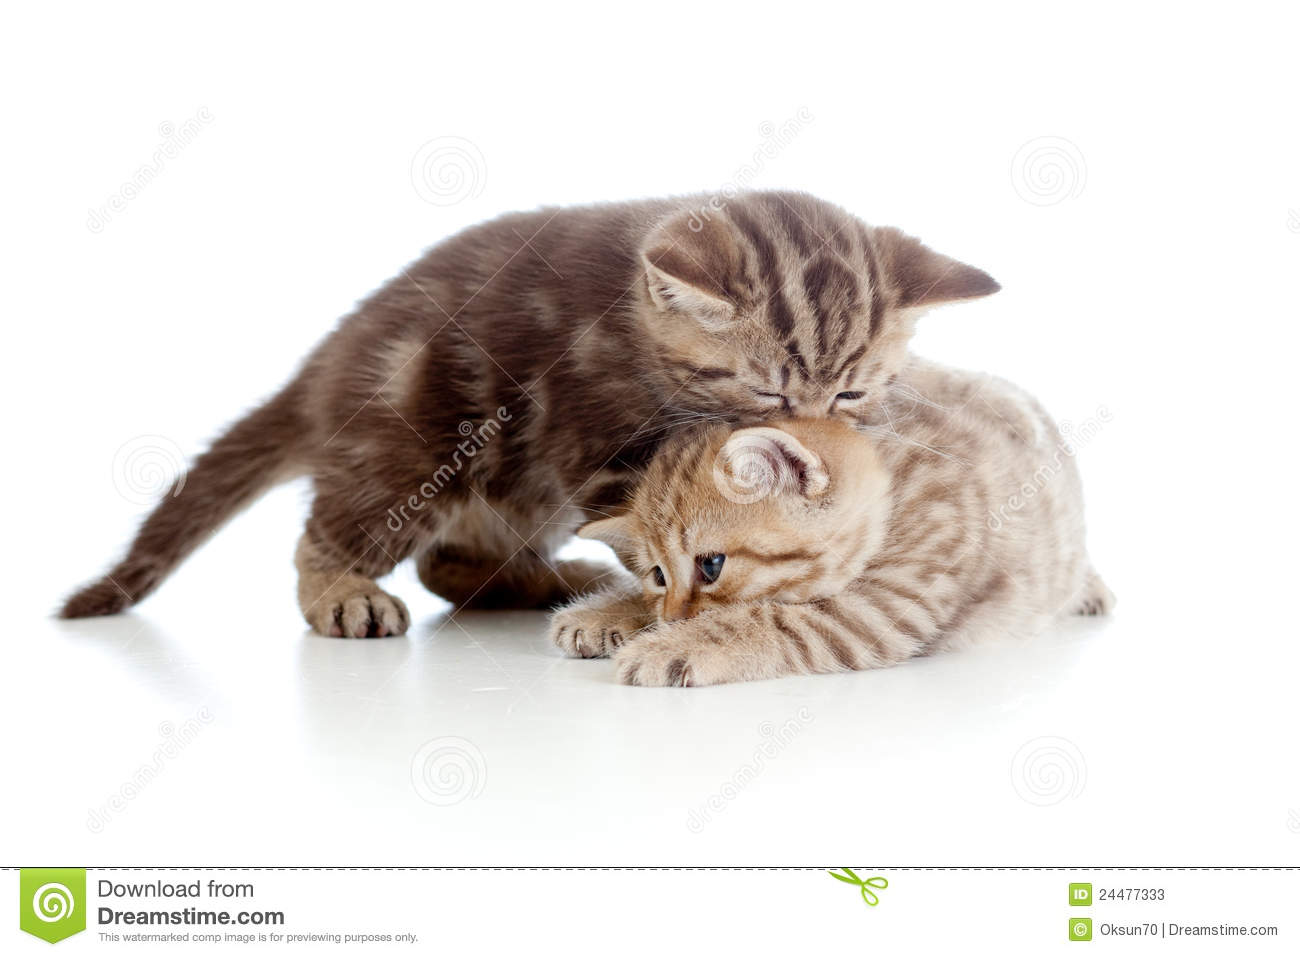 Two Funny Small Kittens Playing With Each Other Stock Photos   Image